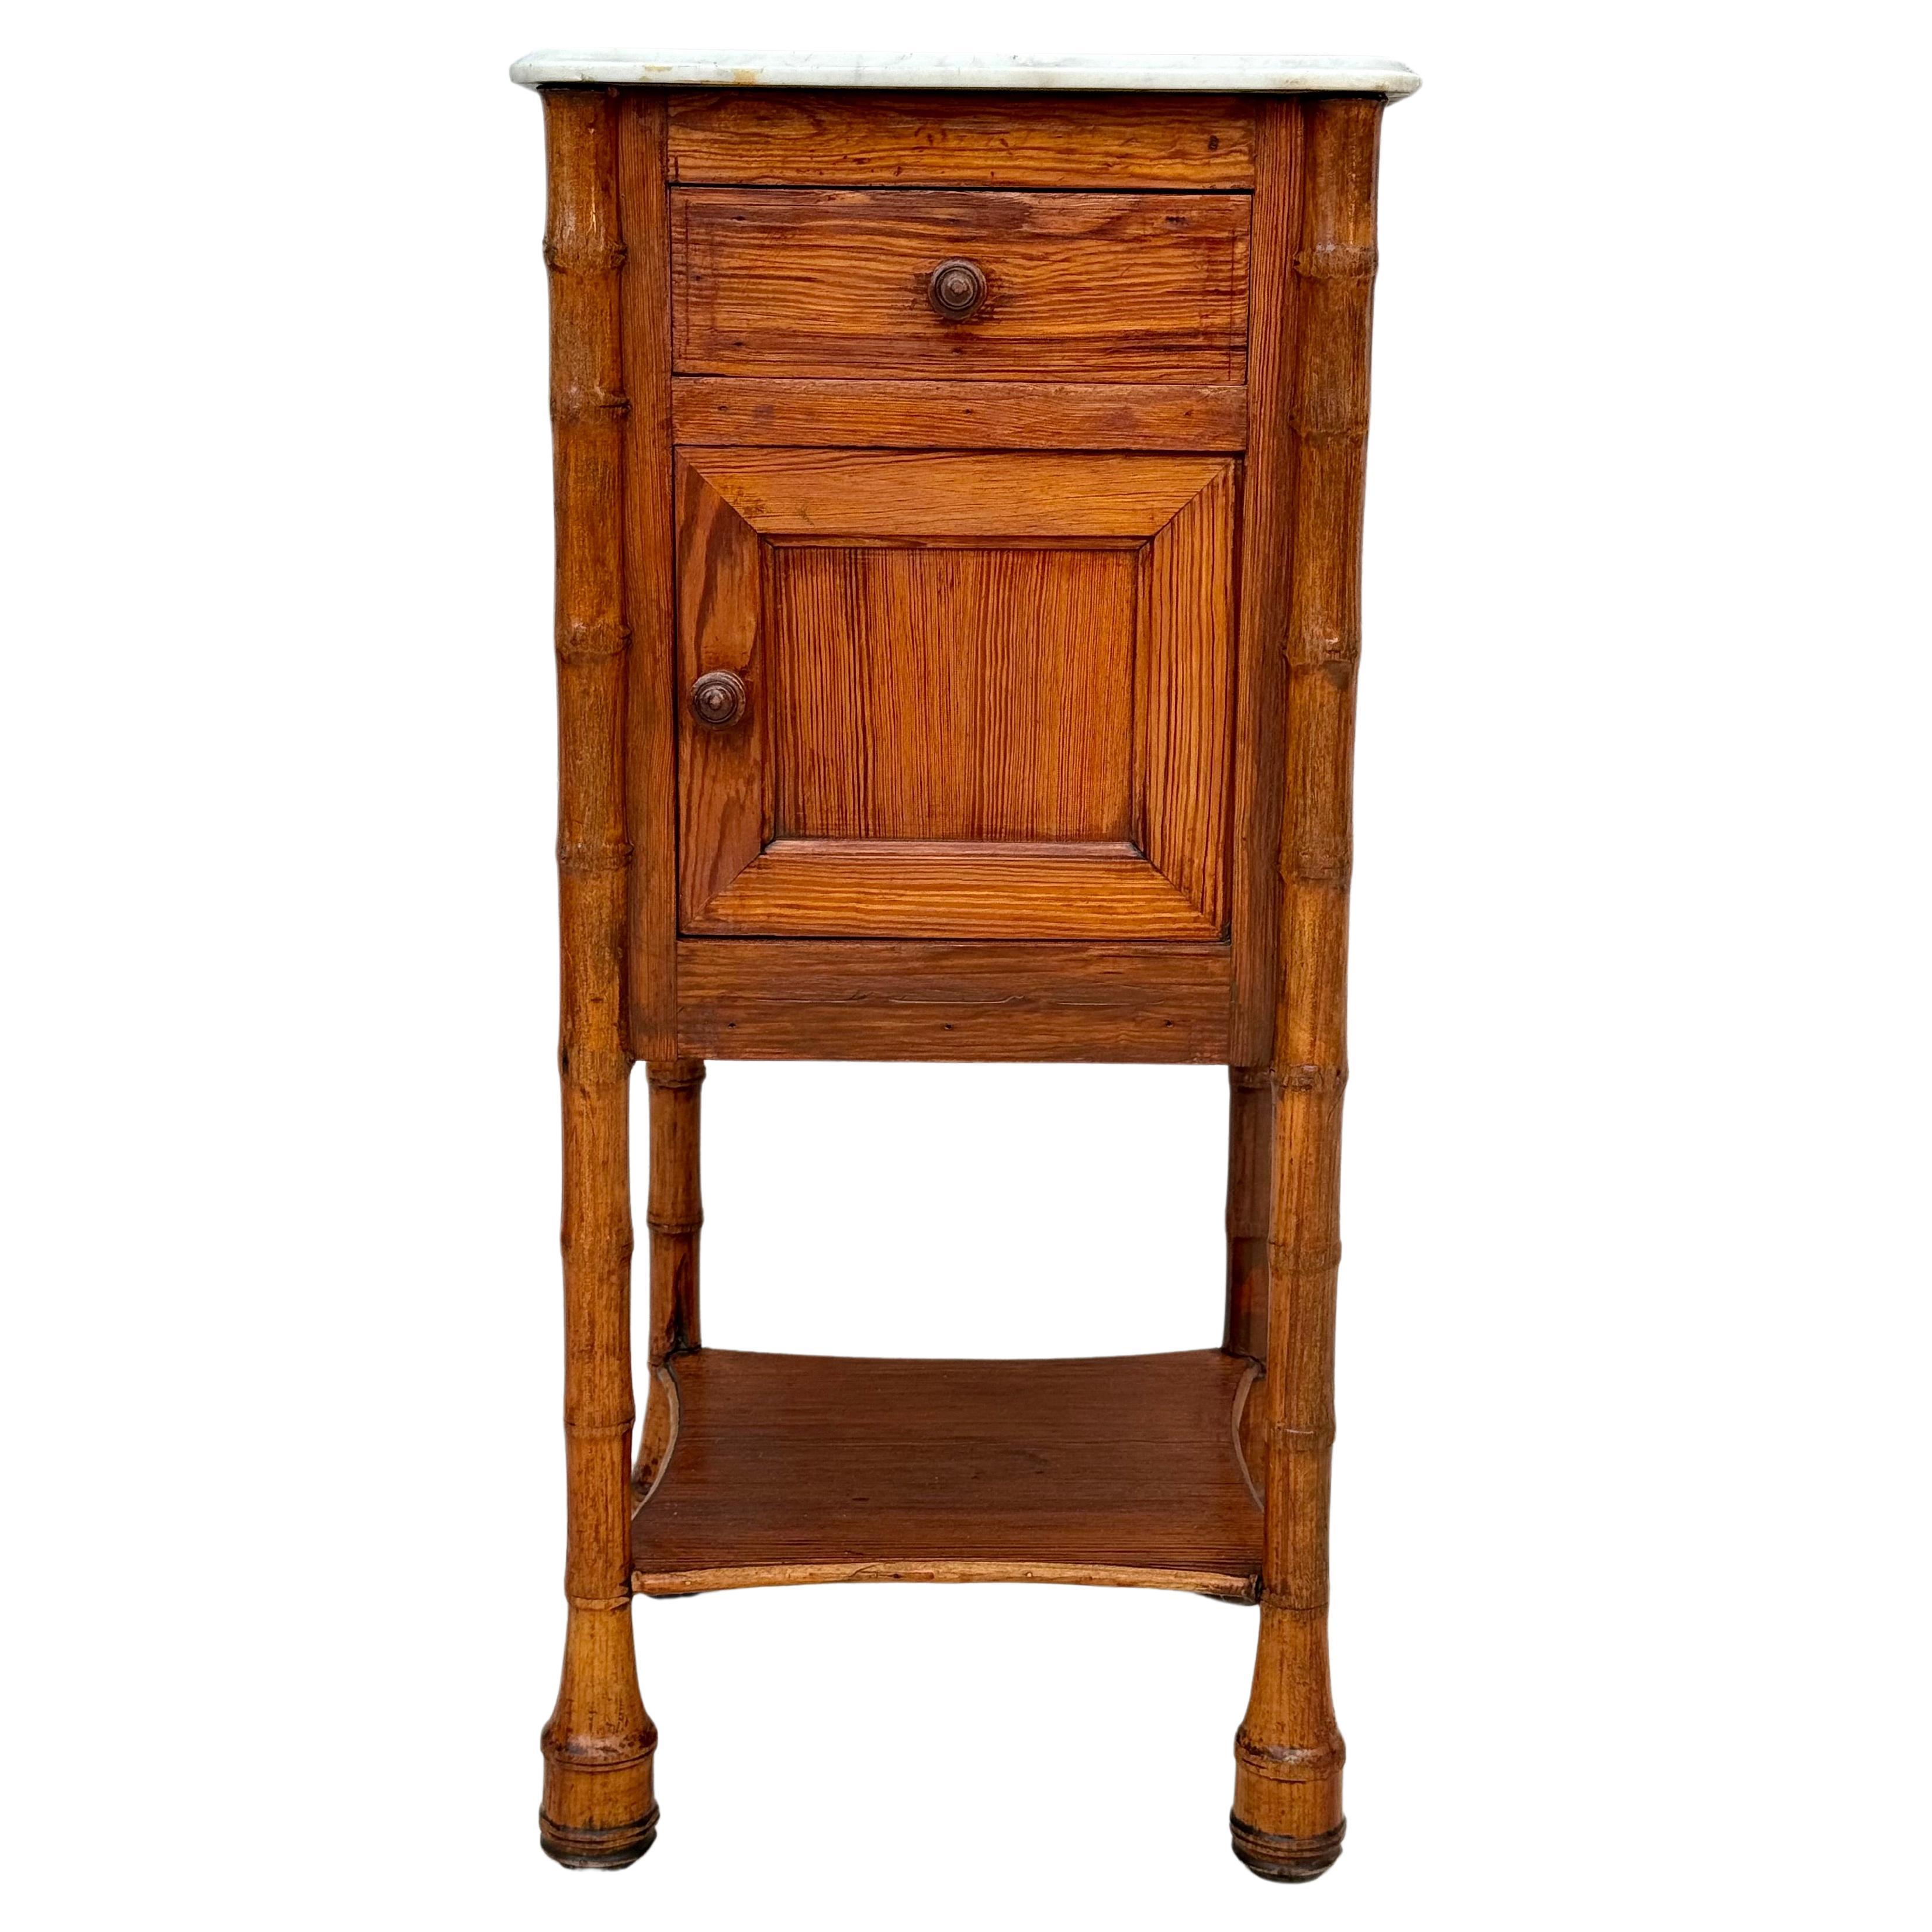 Charming 19th century French faux bamboo nightstand or side table with white marble top. Table features a top drawer over a door with shelf, and an open bottom shelf. Perfect for bedroom night stand or in bathroom as extra storage. 